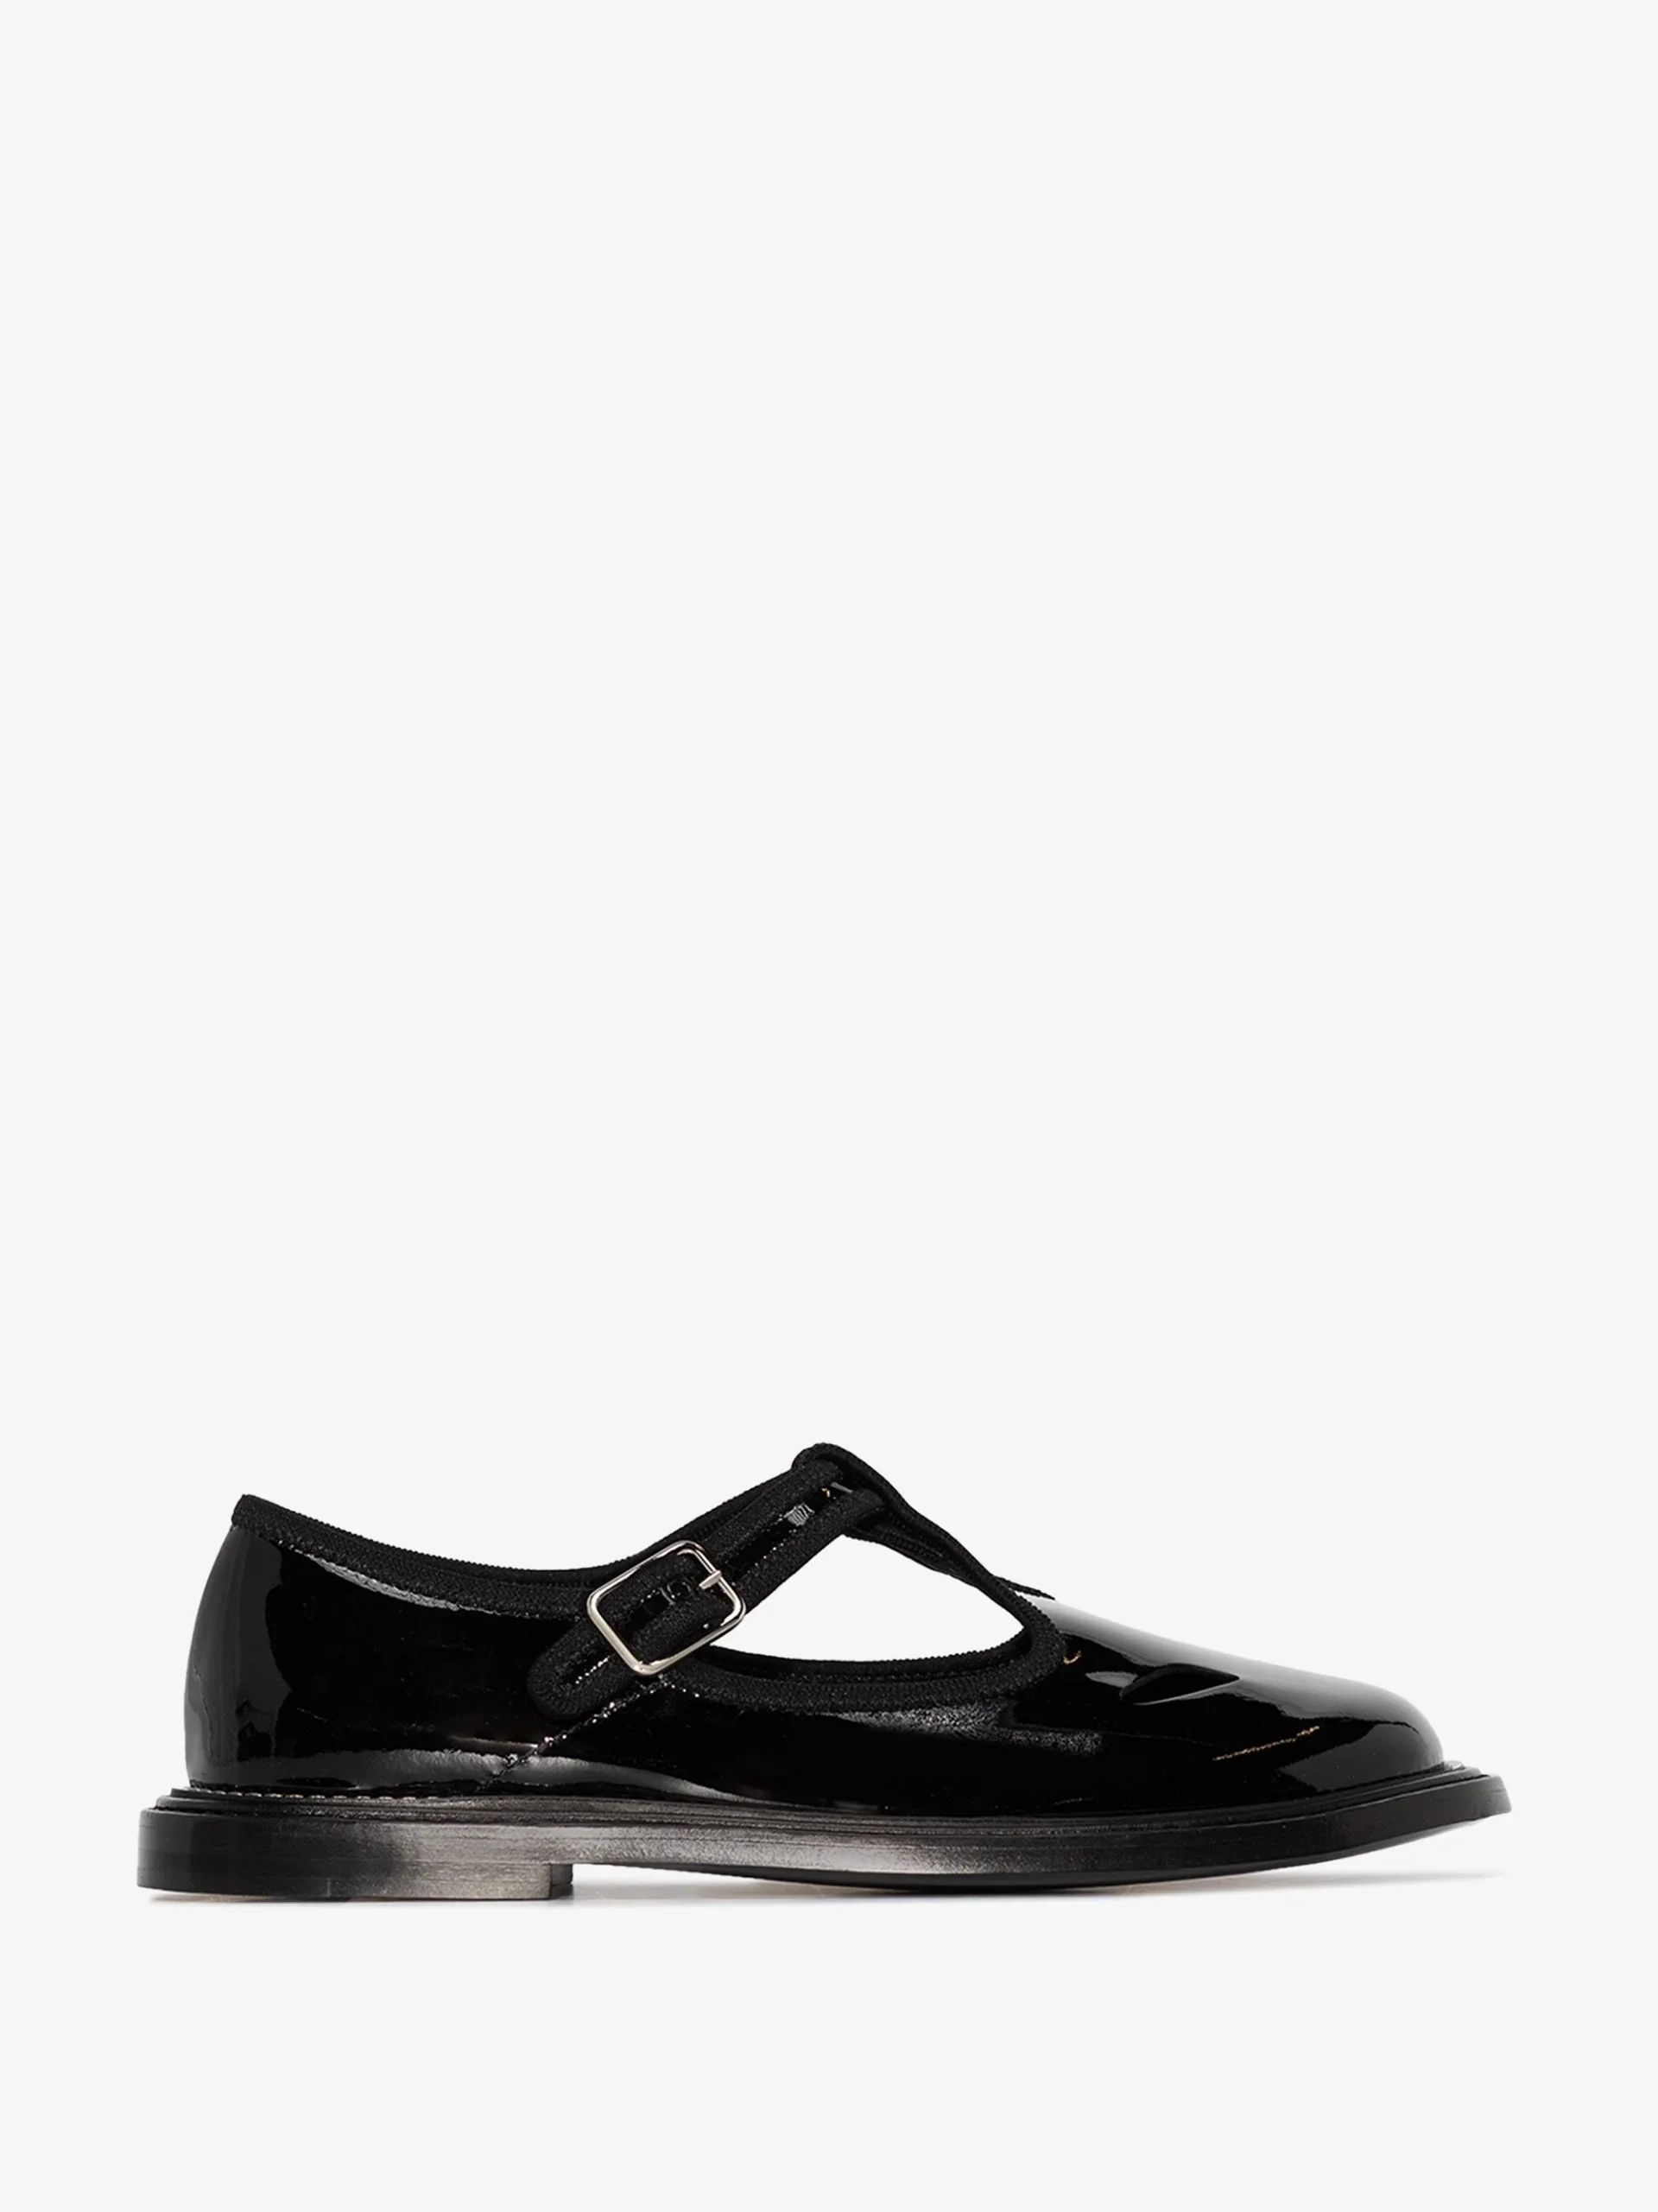 Glossy Finish: Burberry Black Patent Leather T-Bar Shoes